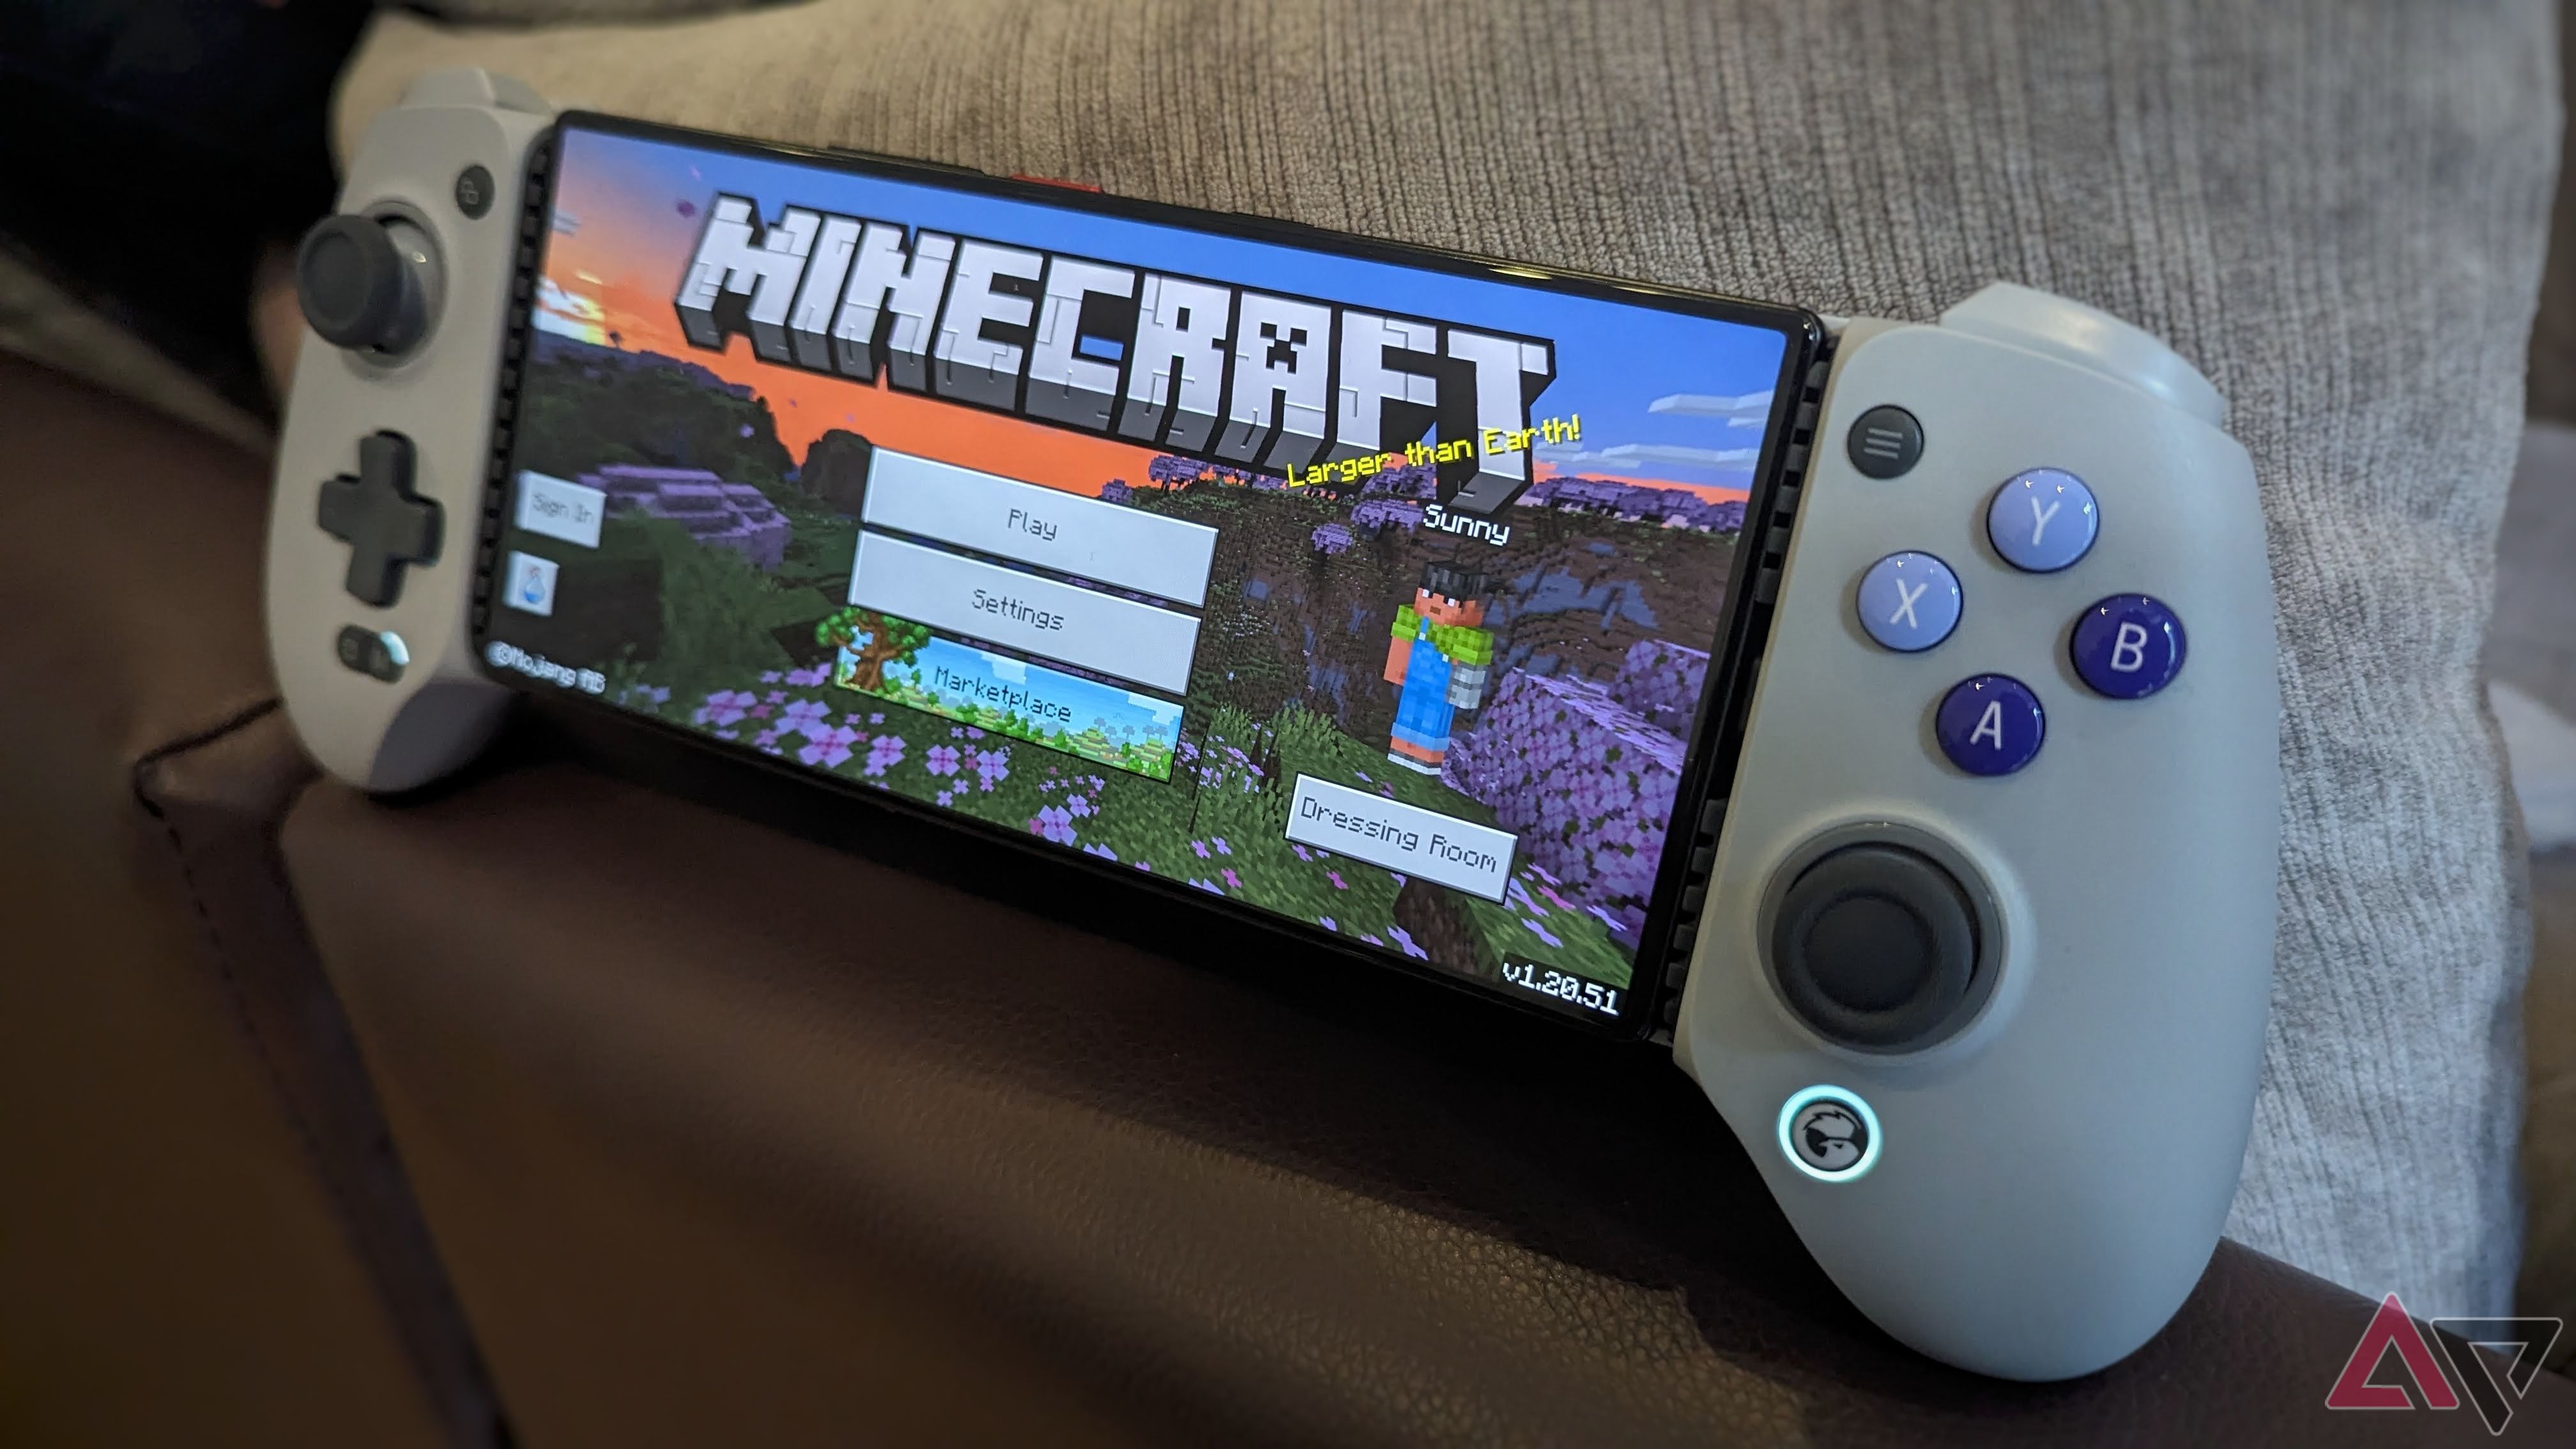 nubia android smartphone running minecraft in game controller